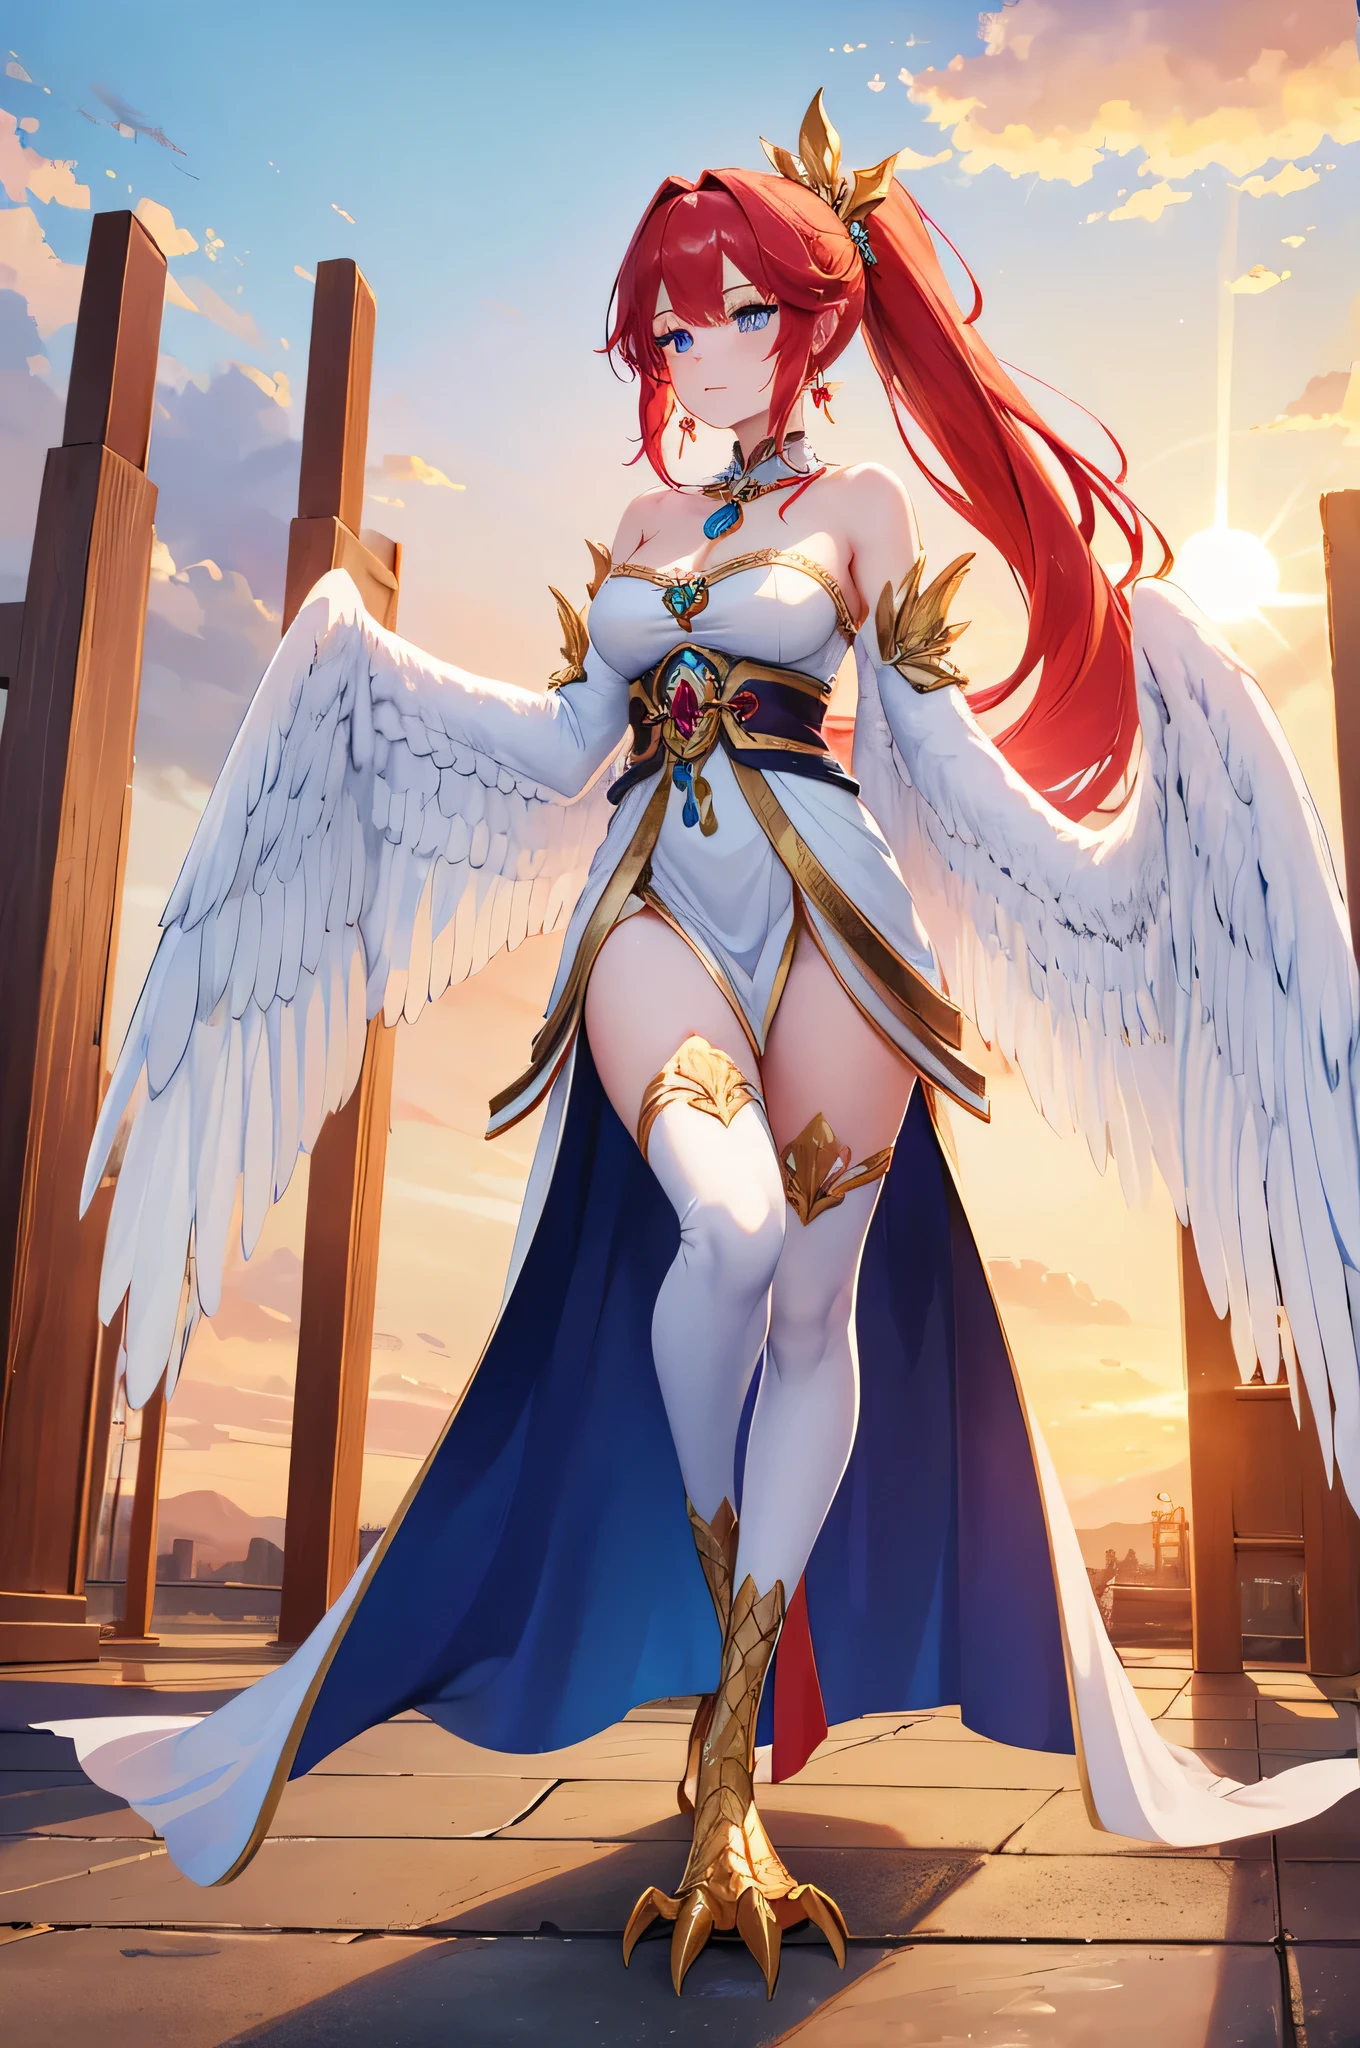 4k,High resolution,one woman,Harpy,red hair,long ponytail,blue eyes,white wings,golden toenails,goddess,White Holy Dress,goddess crown,jewelry decoration,Earth in the Sky,sunrise